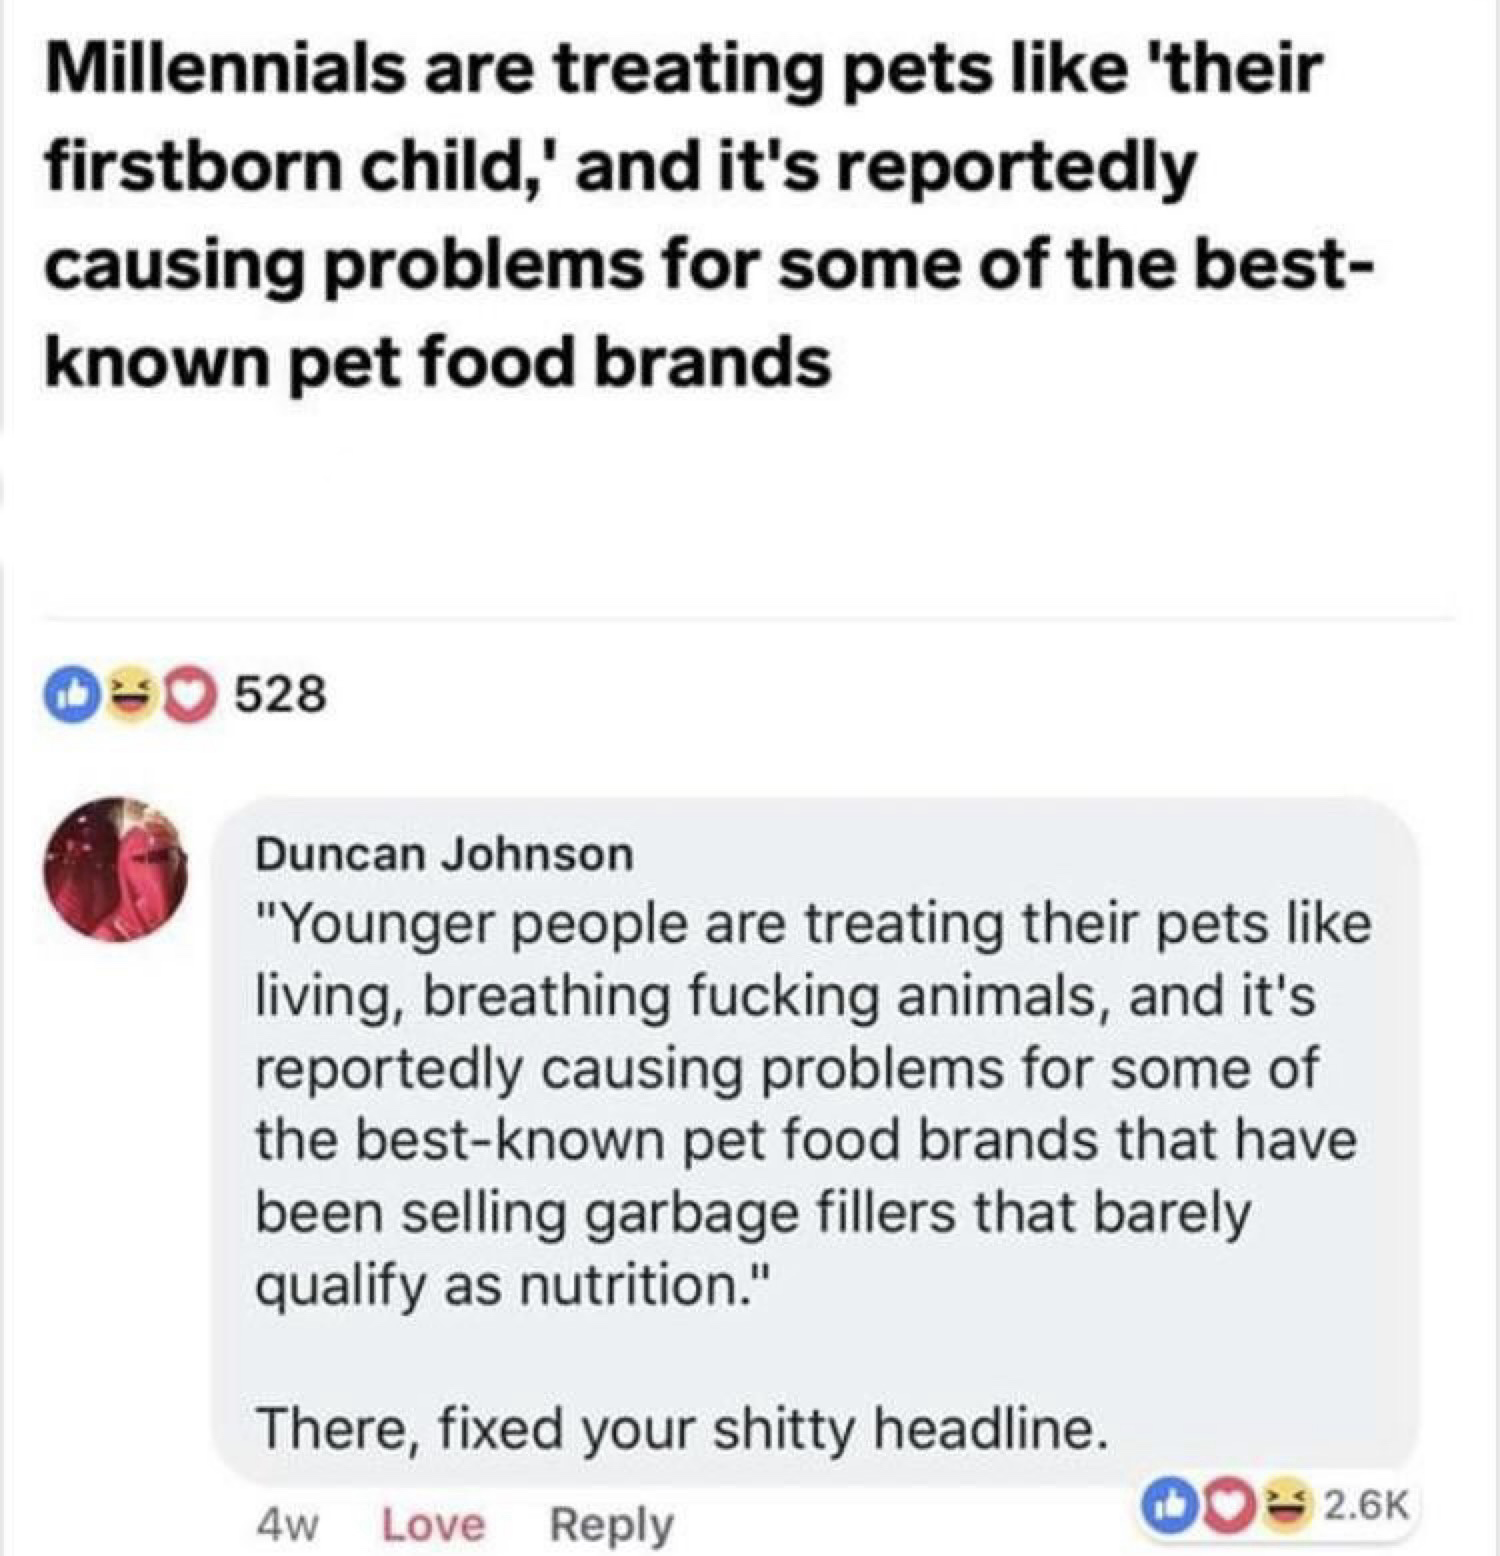 vincent - Millennials are treating pets 'their firstborn child,' and it's reportedly causing problems for some of the best known pet food brands 0 528 Duncan Johnson "Younger people are treating their pets living, breathing fucking animals, and it's repor